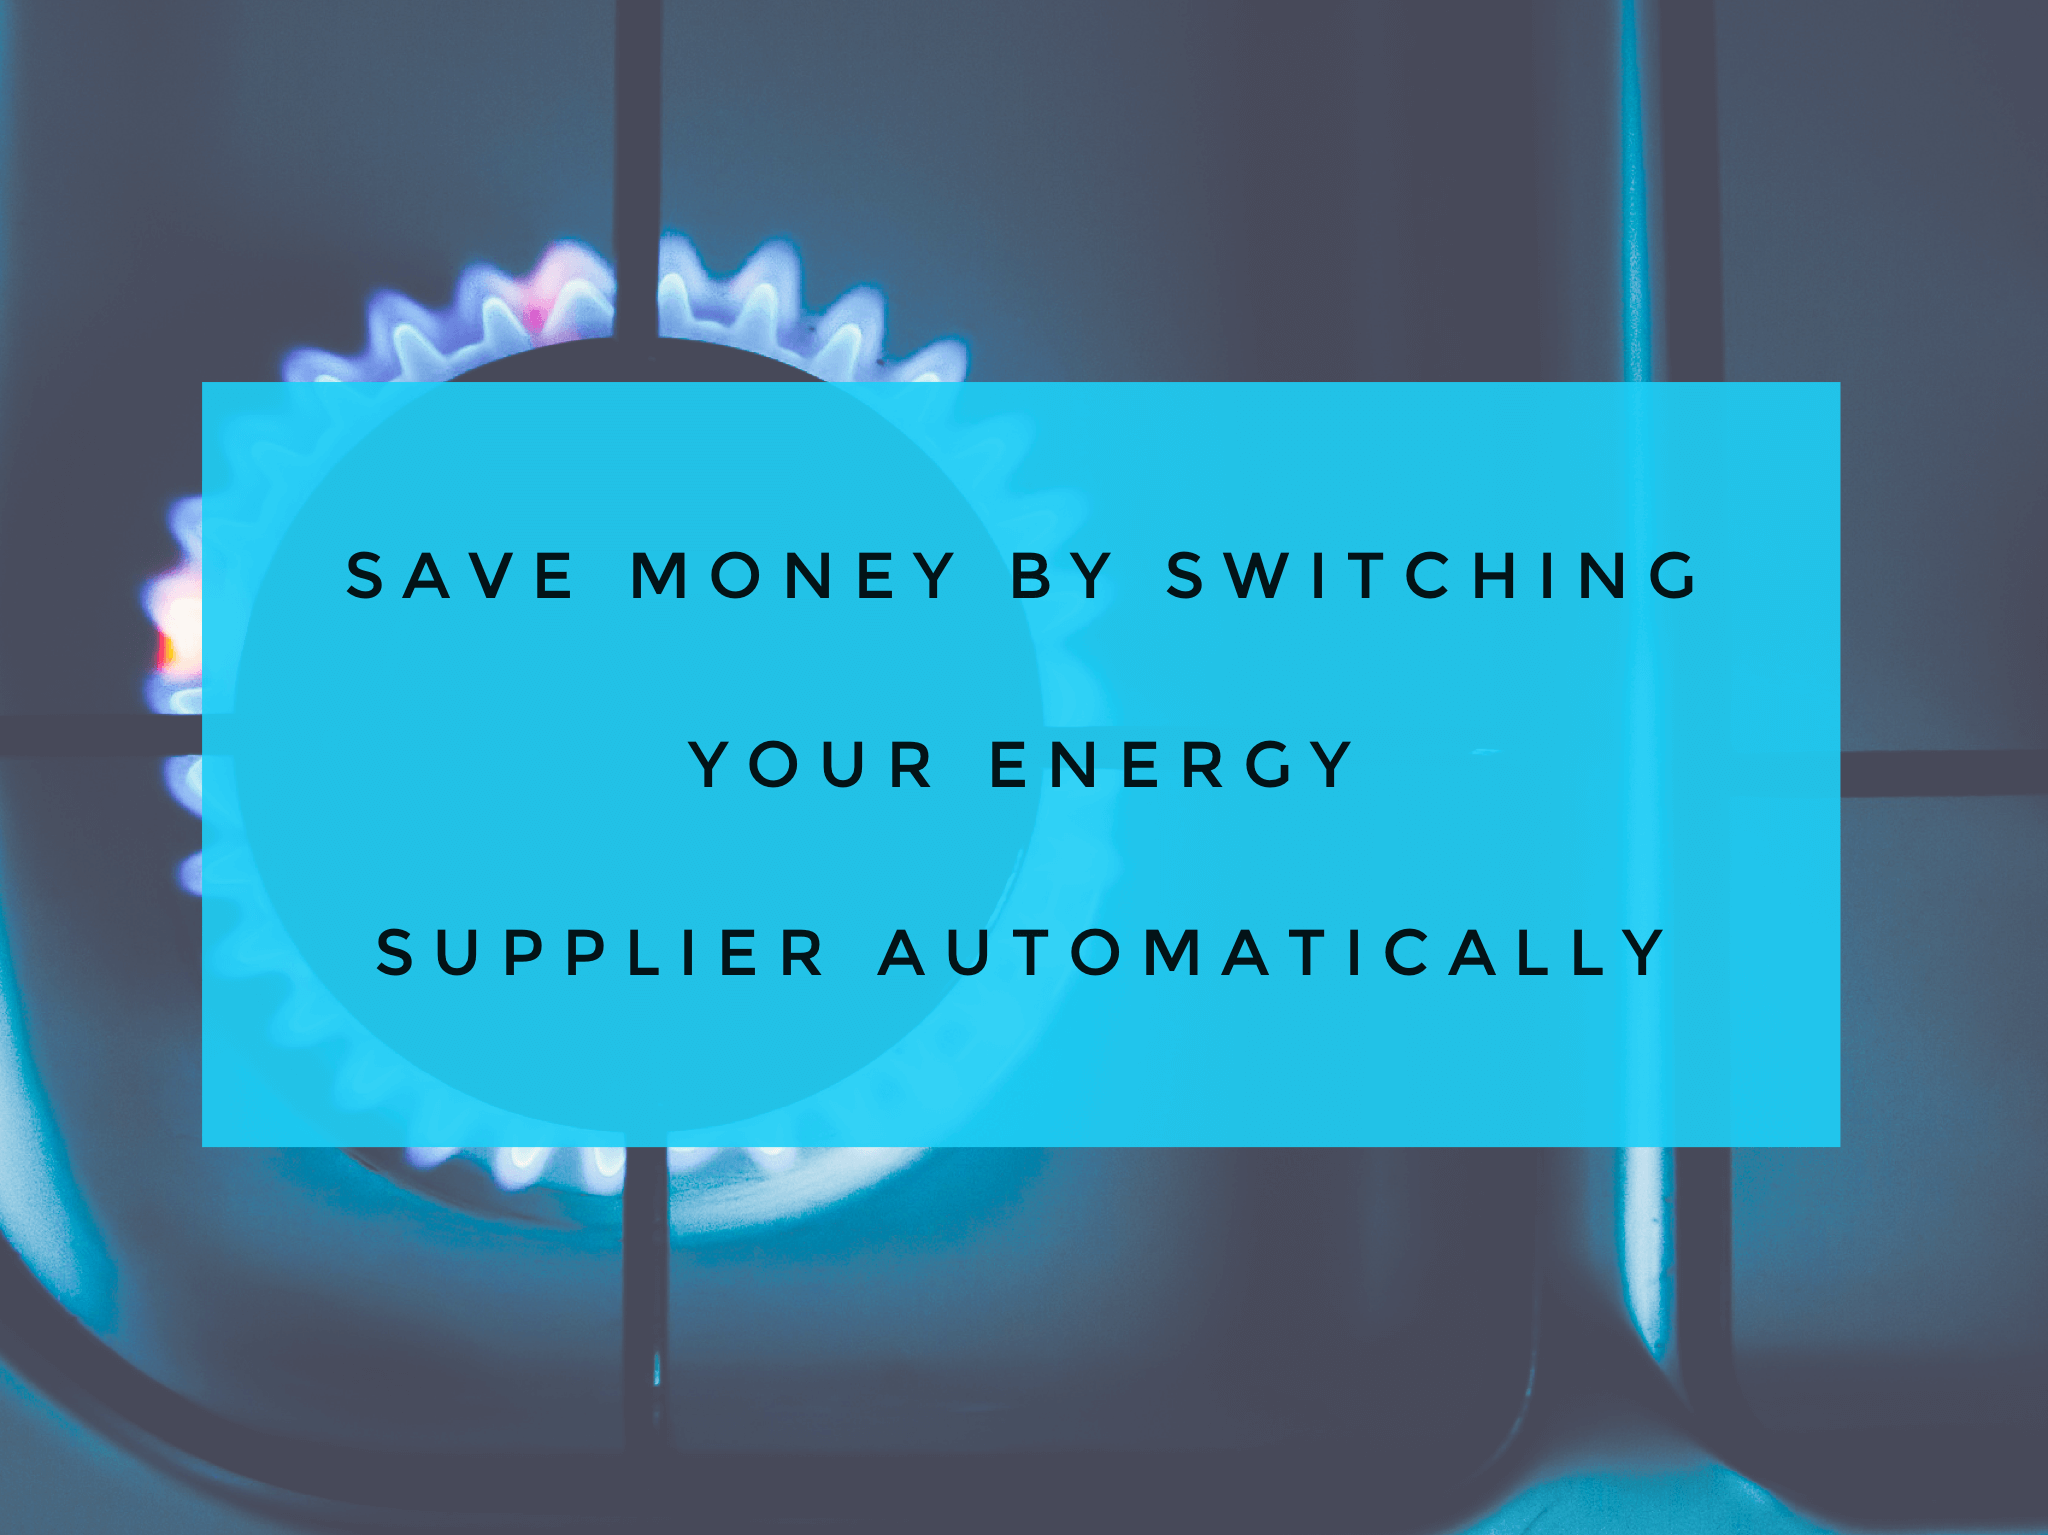 Save money by switching your energy supplier automatically